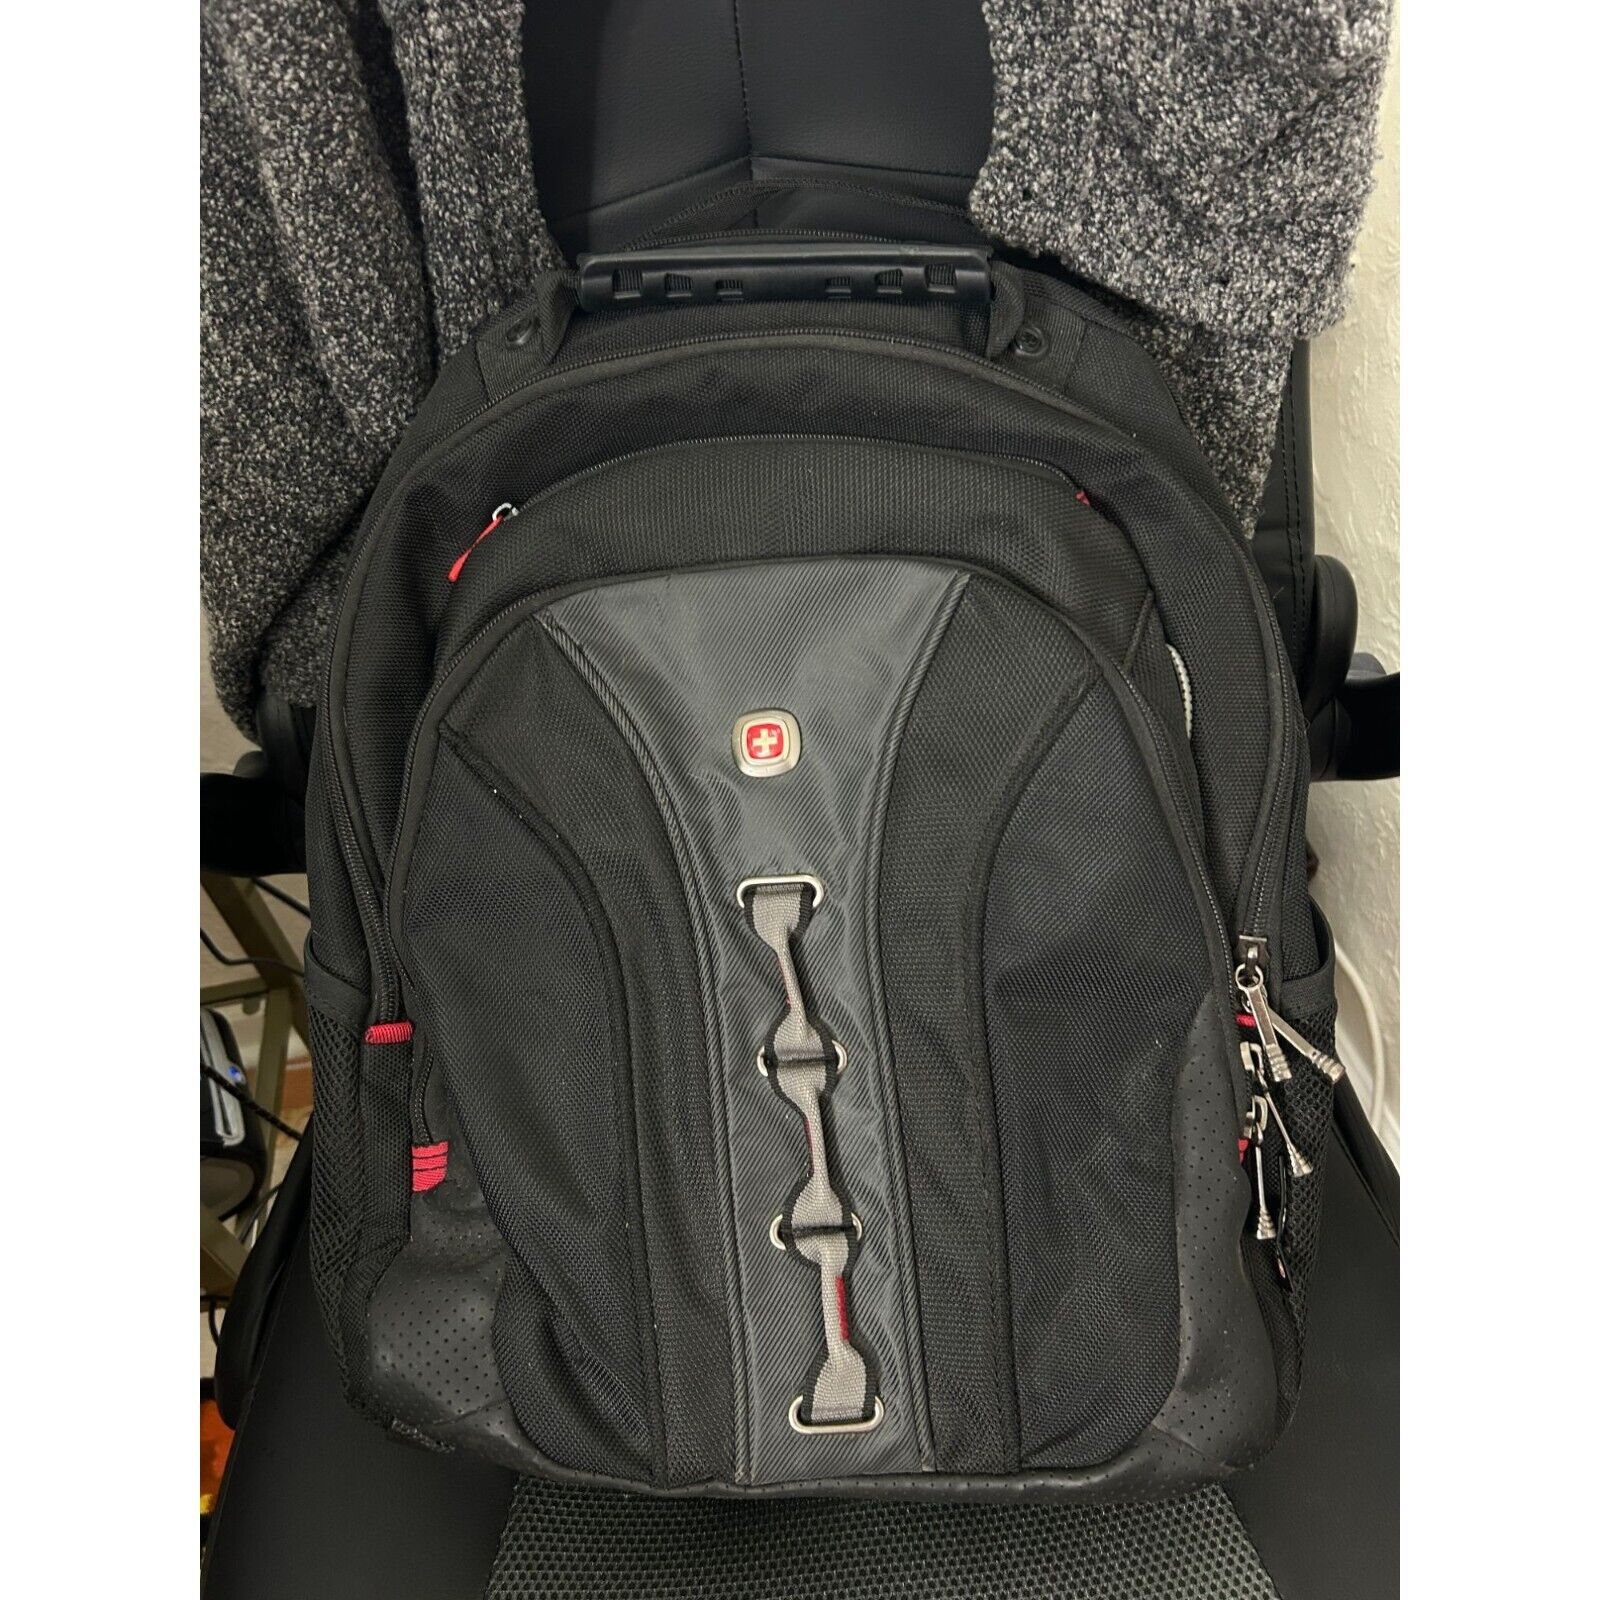 SwissGear by Wenger Computer Backpack Aiport Security Checkpoint Friendly